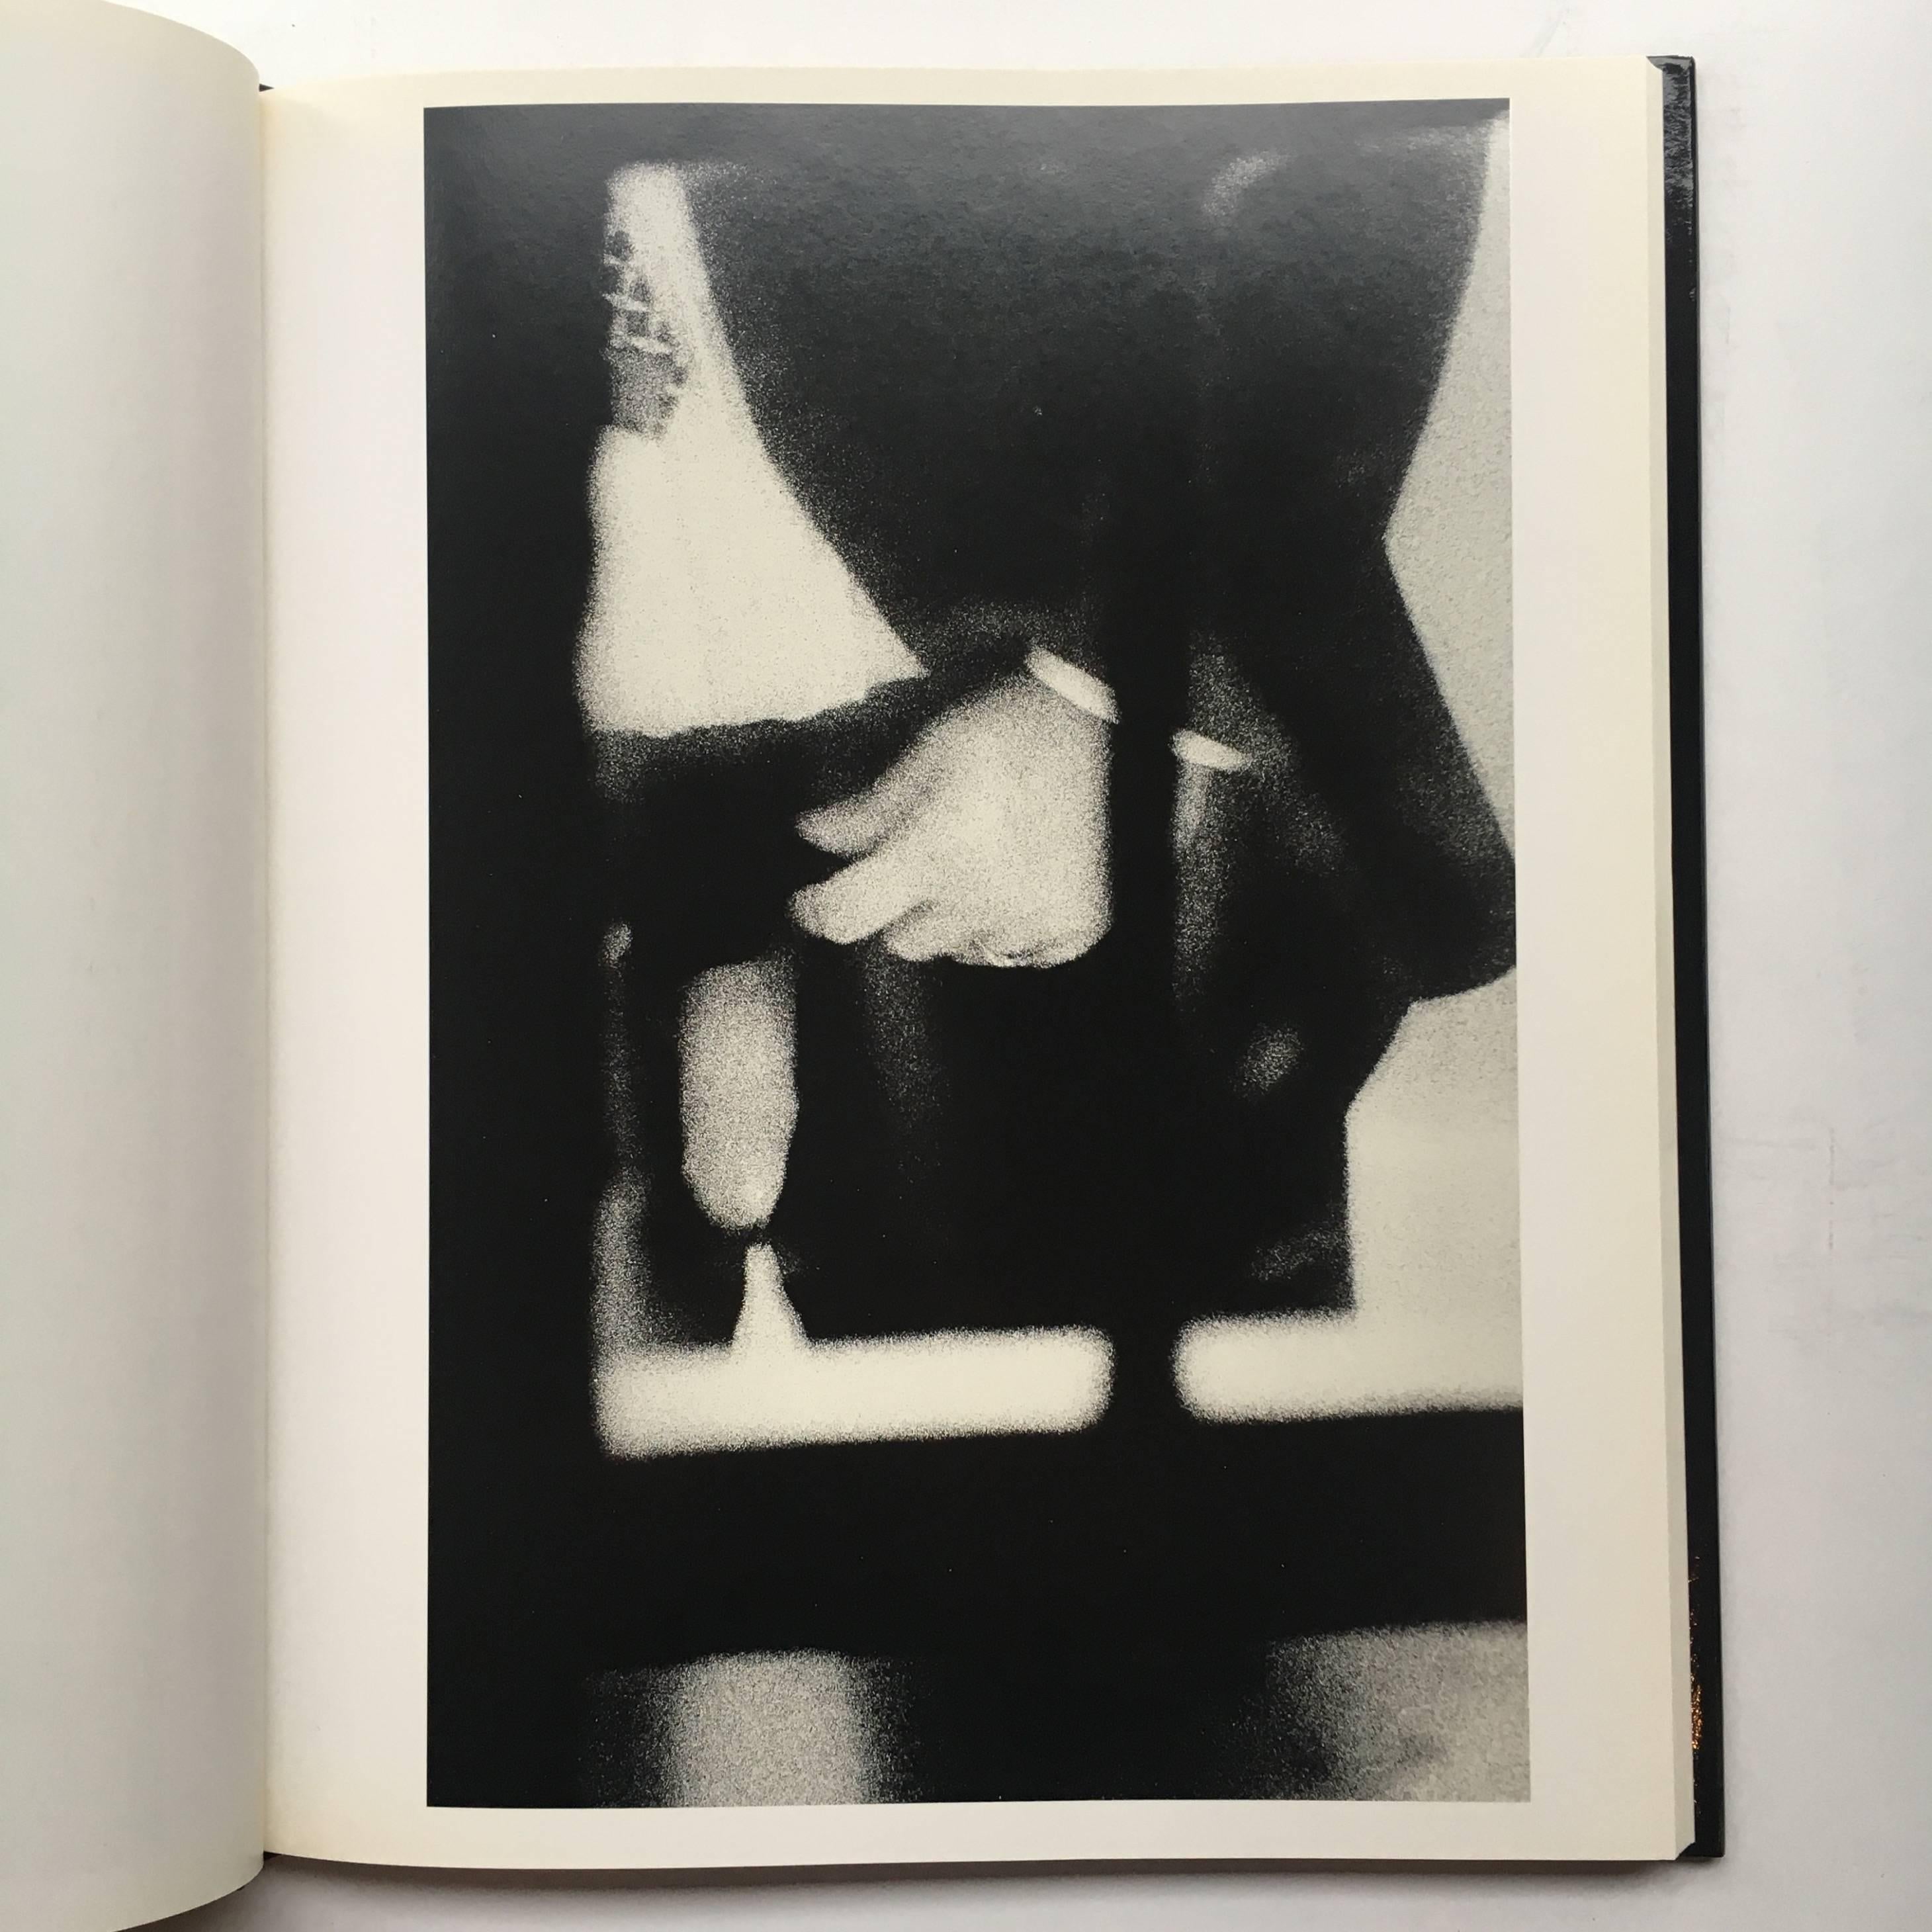 First edition, published by Scalo Publishers, 1995.

In 1995, American photographer Merry Alpern was propelled into the limelight through her series of voyeuristic photographs taken secretly through the bathroom window of a bathroom of an